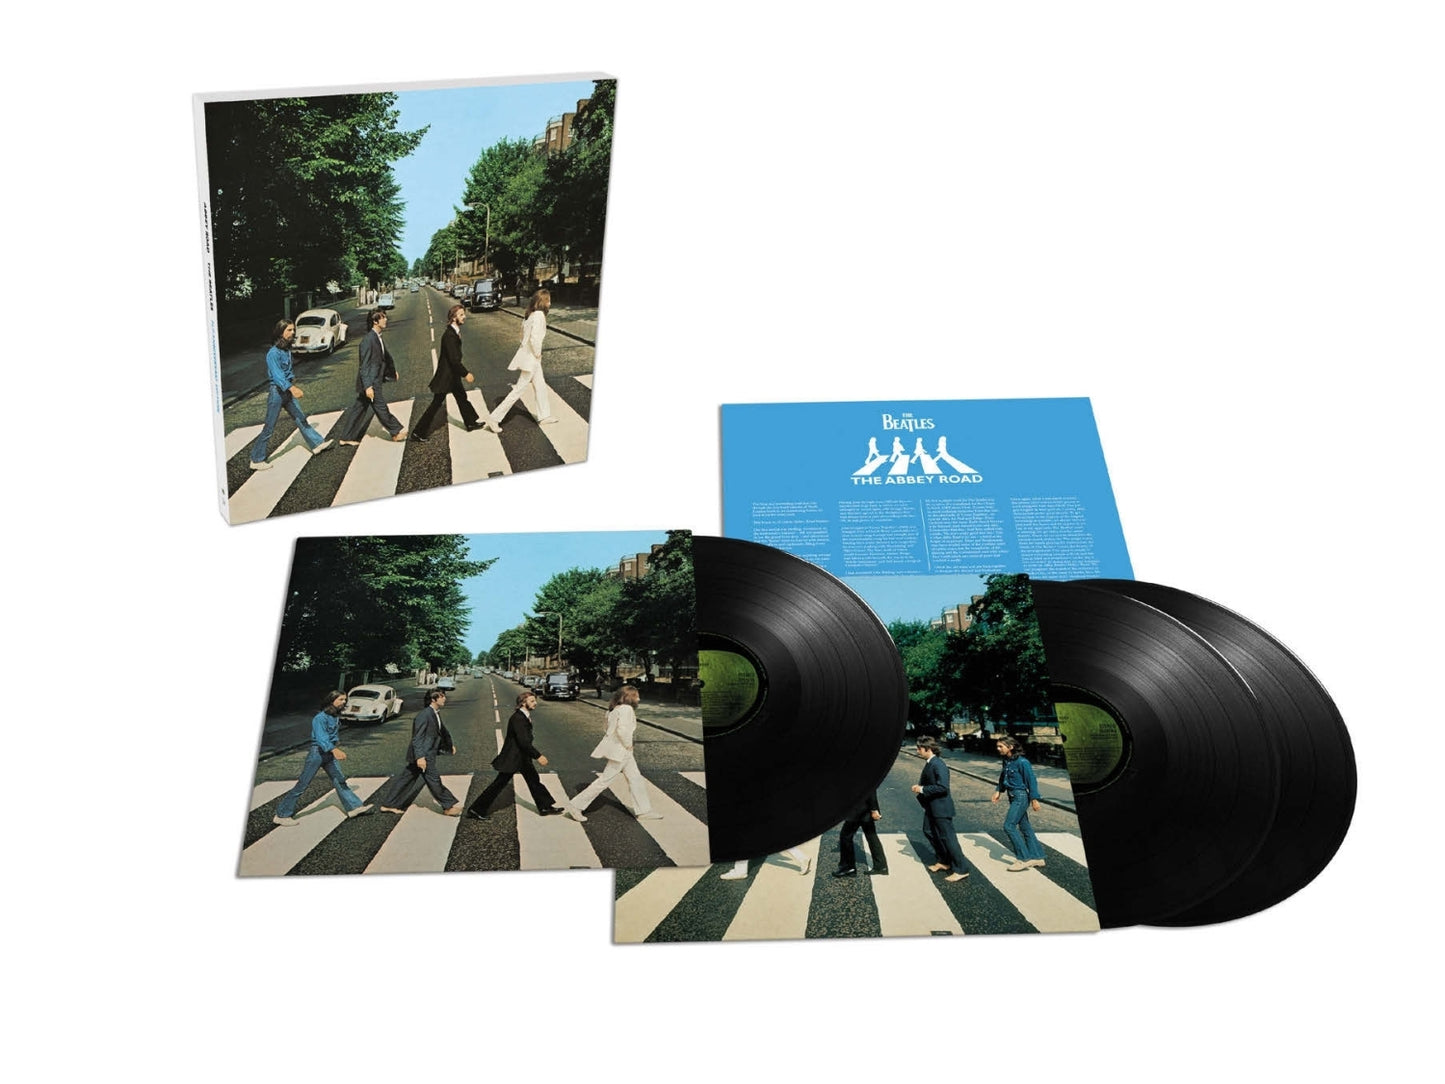 The Beatles - Abbey Road: Anniversary Edition 3LP